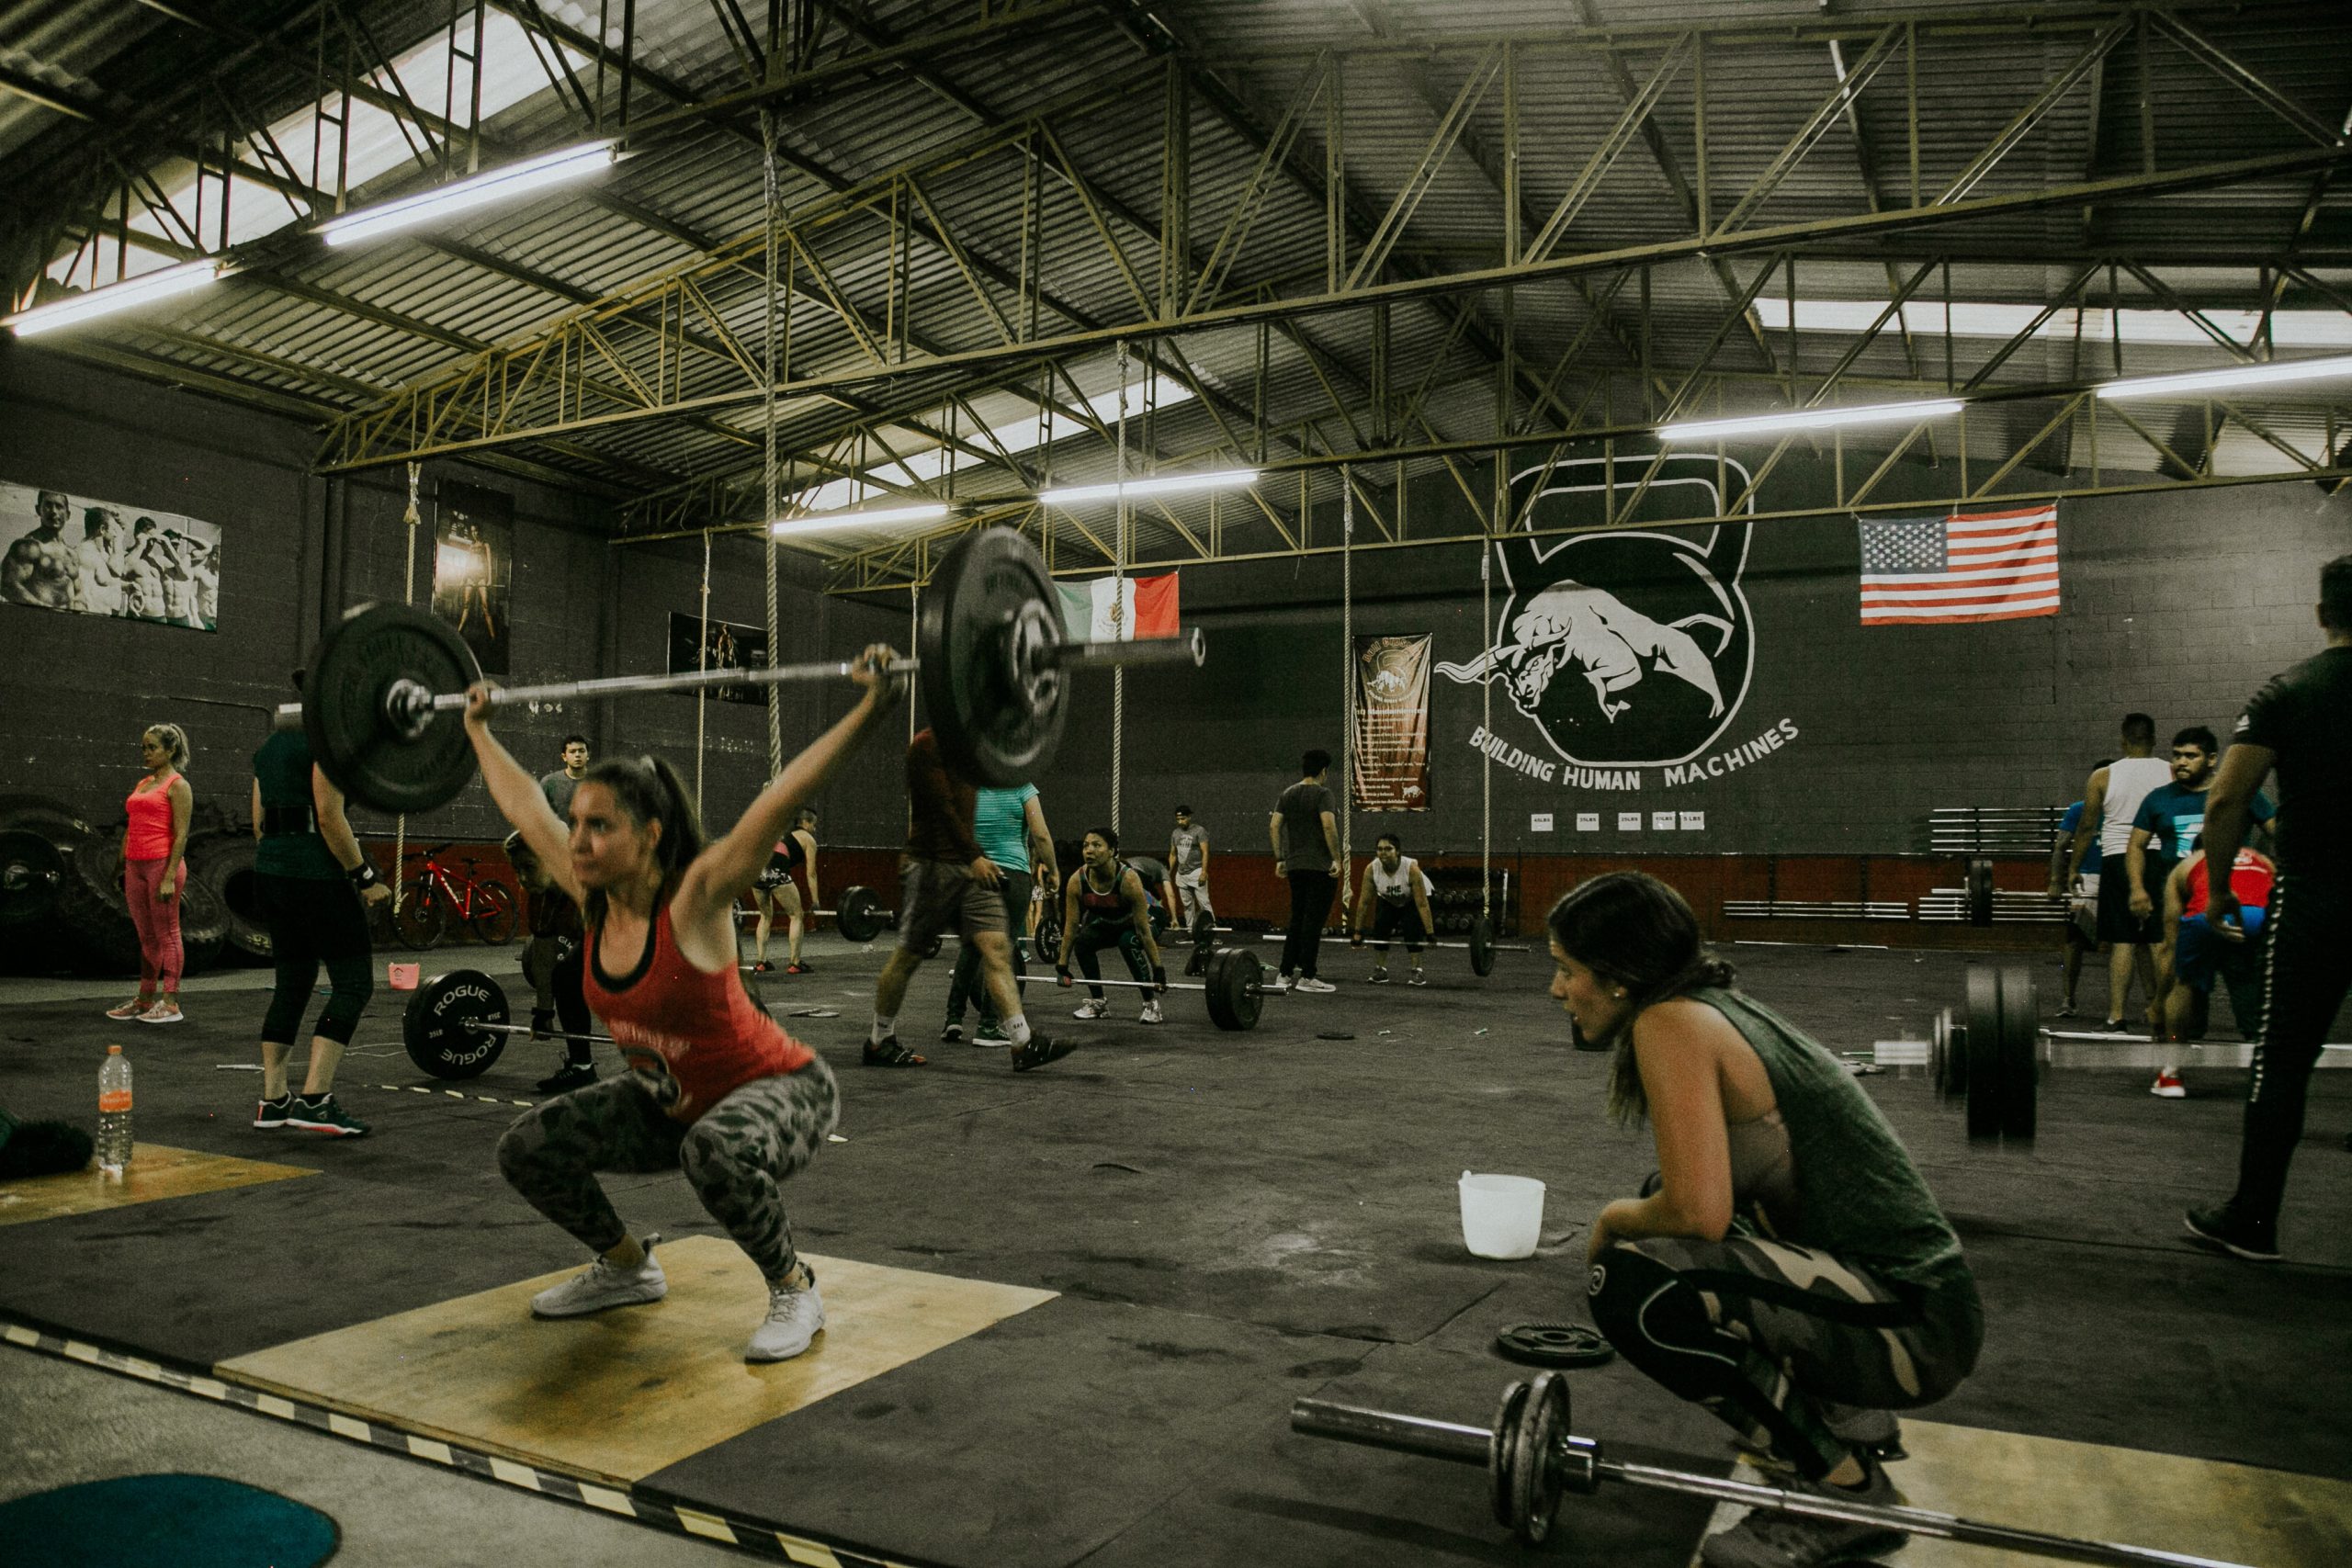 A woman powerlifting while another woman watch her stance